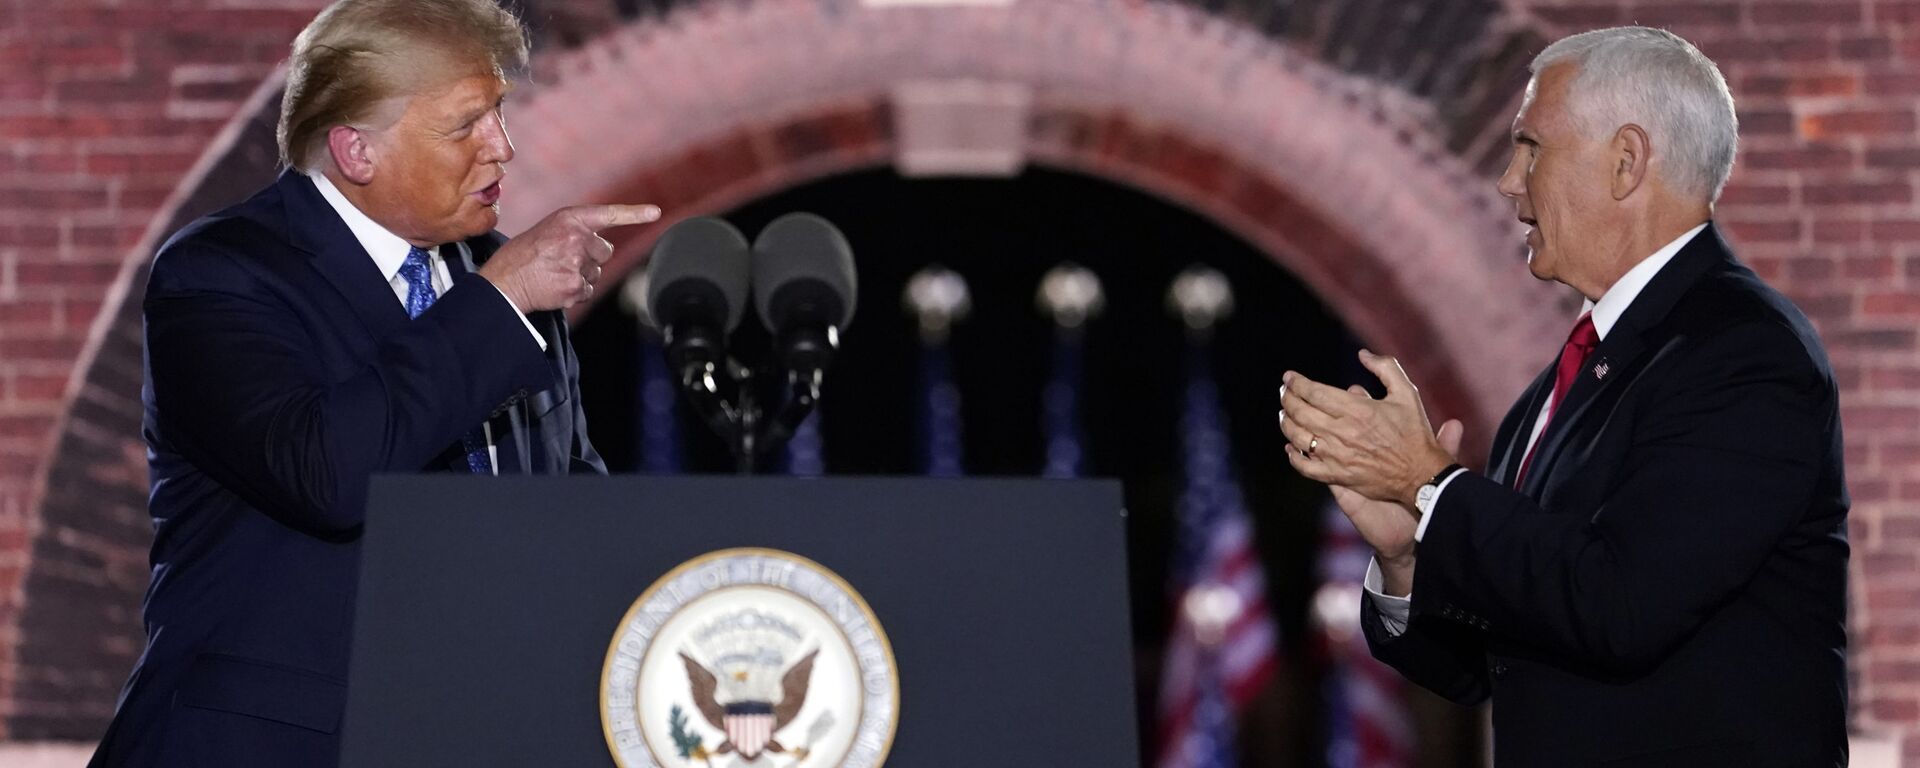 President Donald Trump joins Vice President Mike Pence on stage after Pence spoke on the third day of the Republican National Convention at Fort McHenry National Monument and Historic Shrine in Baltimore, Wednesday, Aug. 26, 2020 - Sputnik International, 1920, 16.03.2022